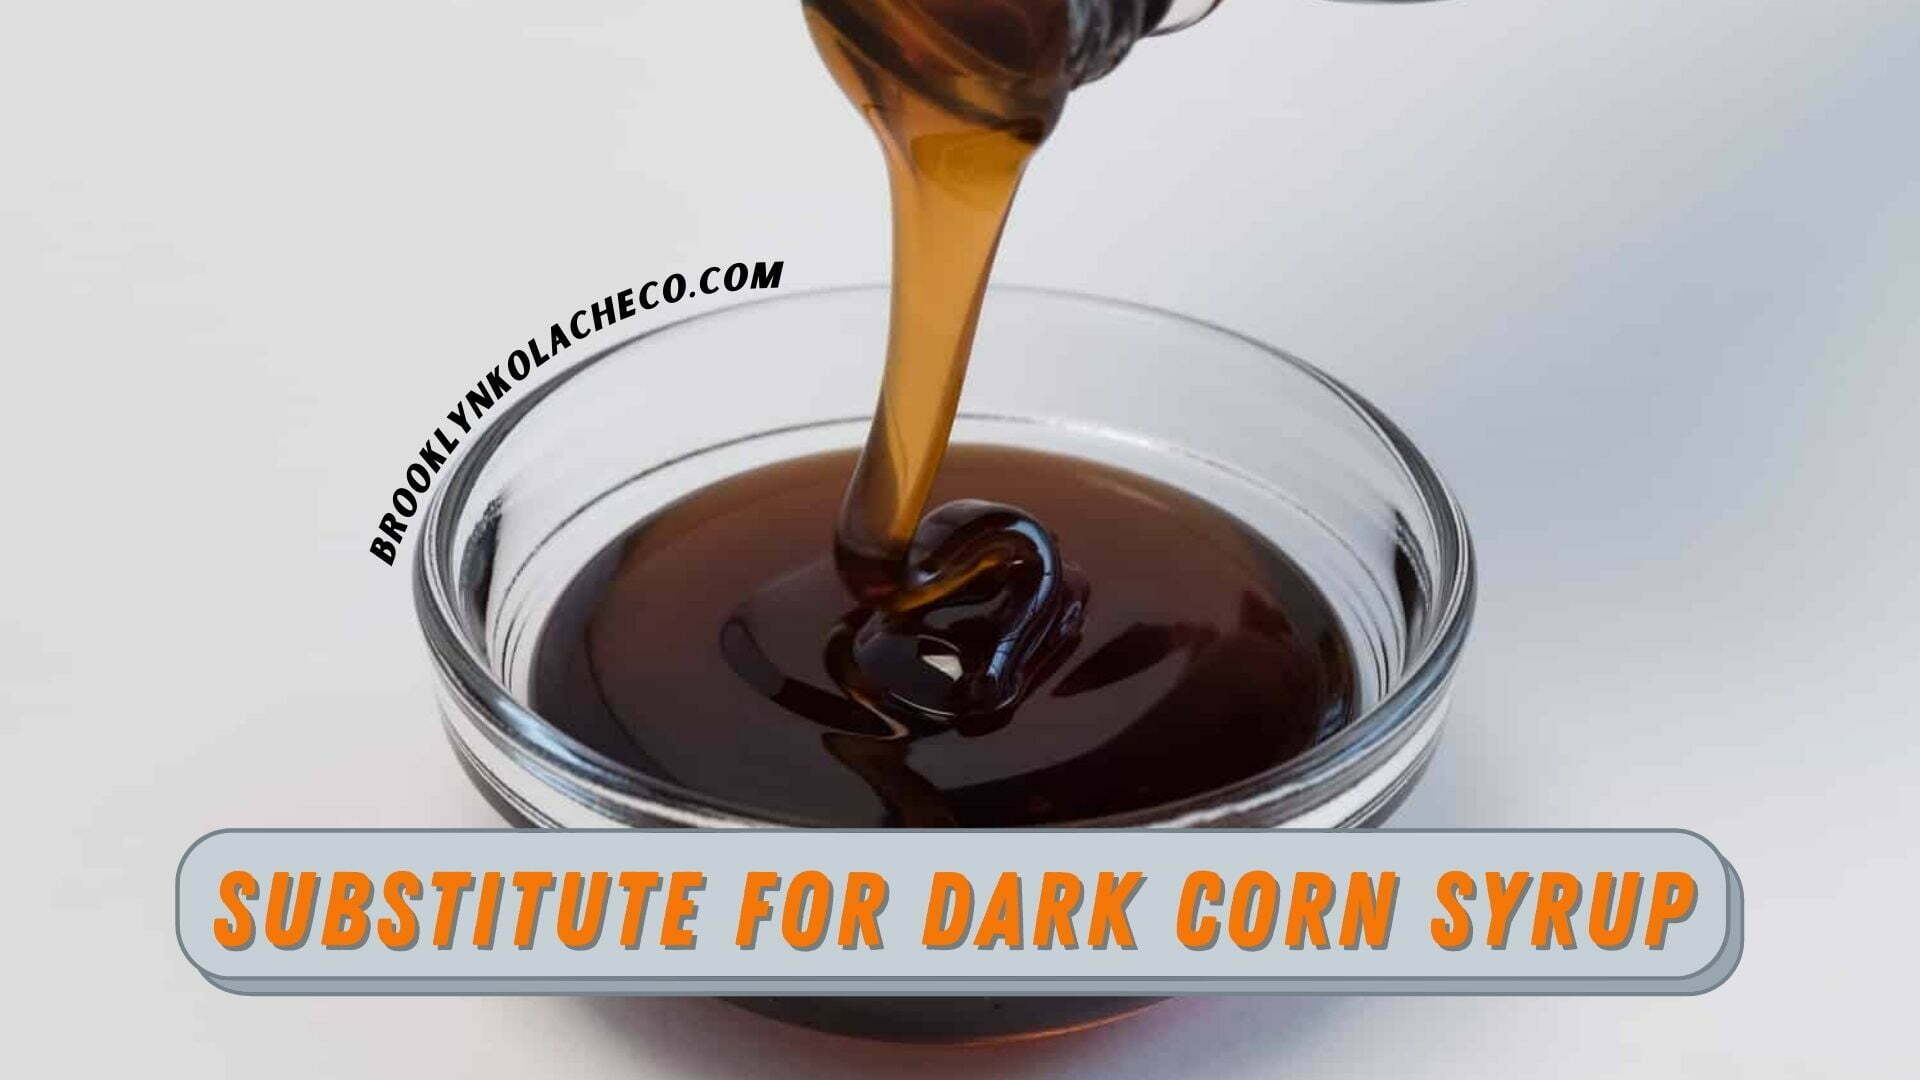 Substitutes for Dark Corn Syrup